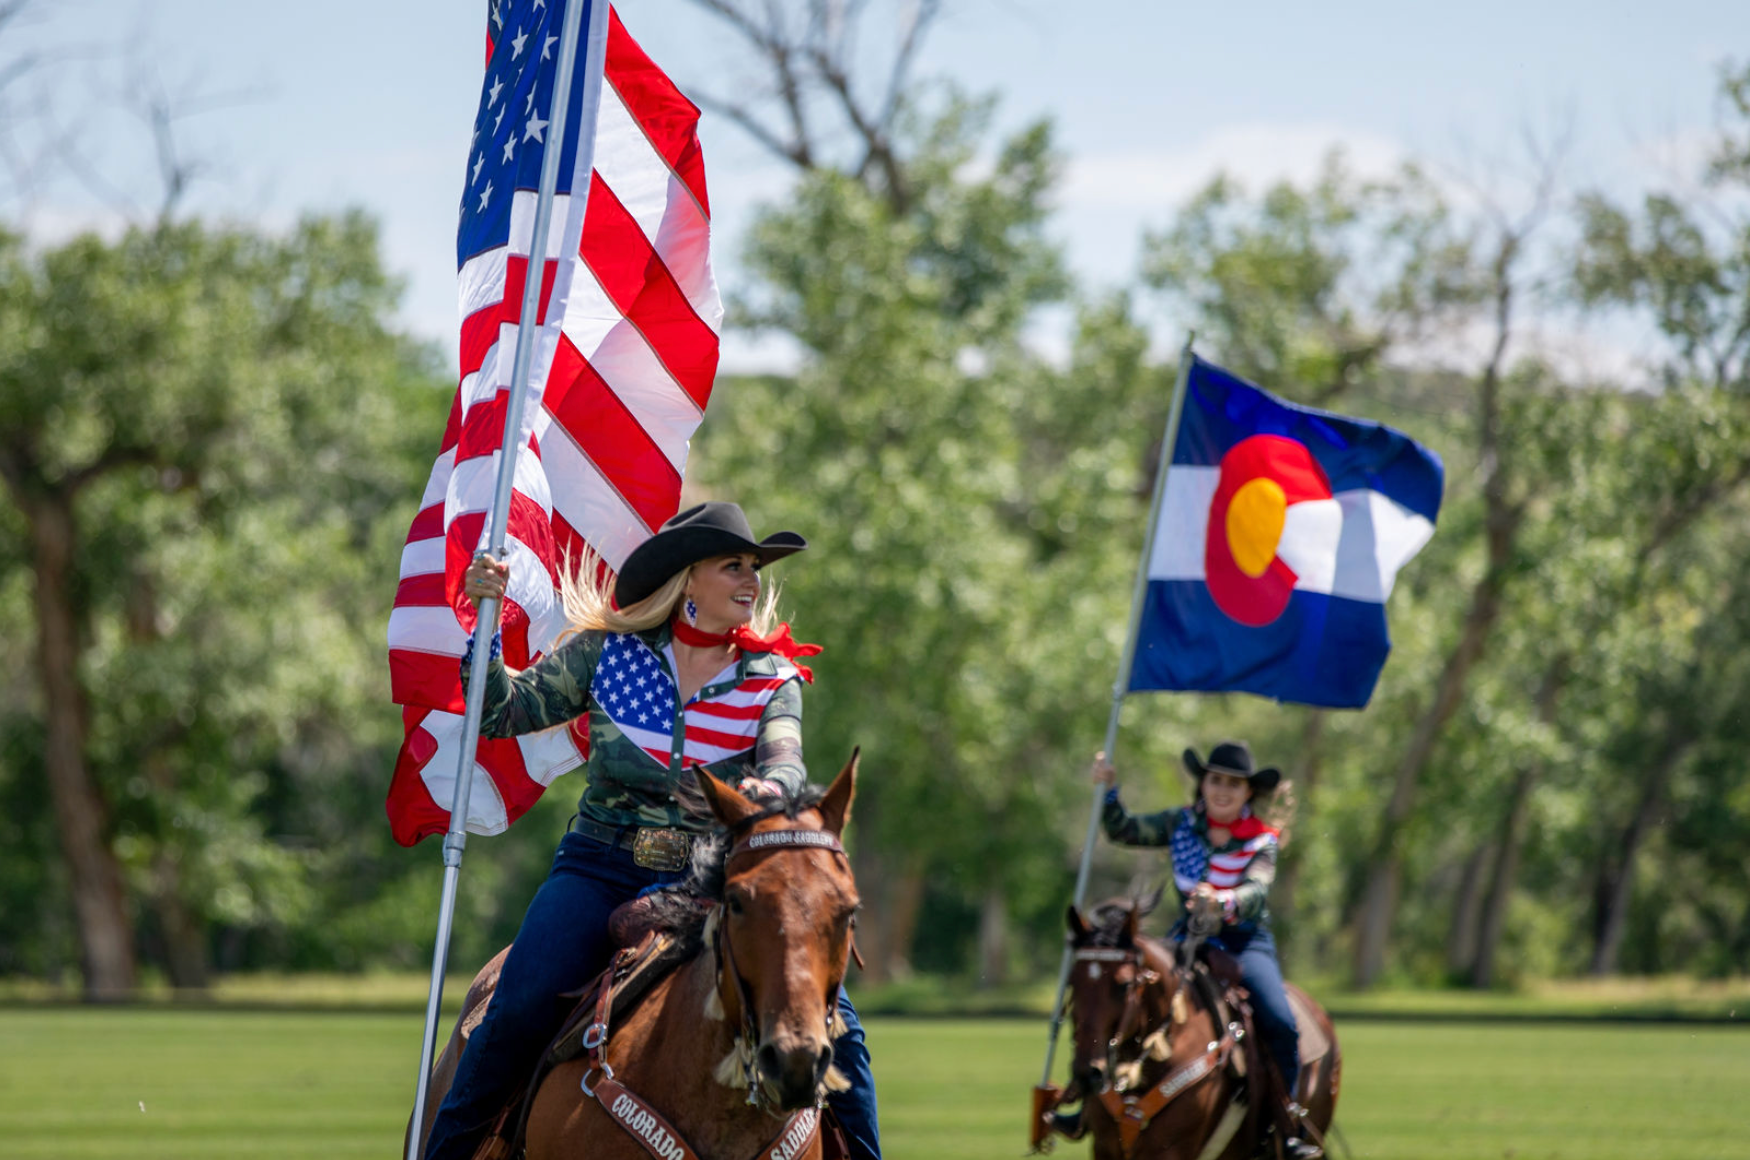 Two people are riding horses and holding flags in a field.